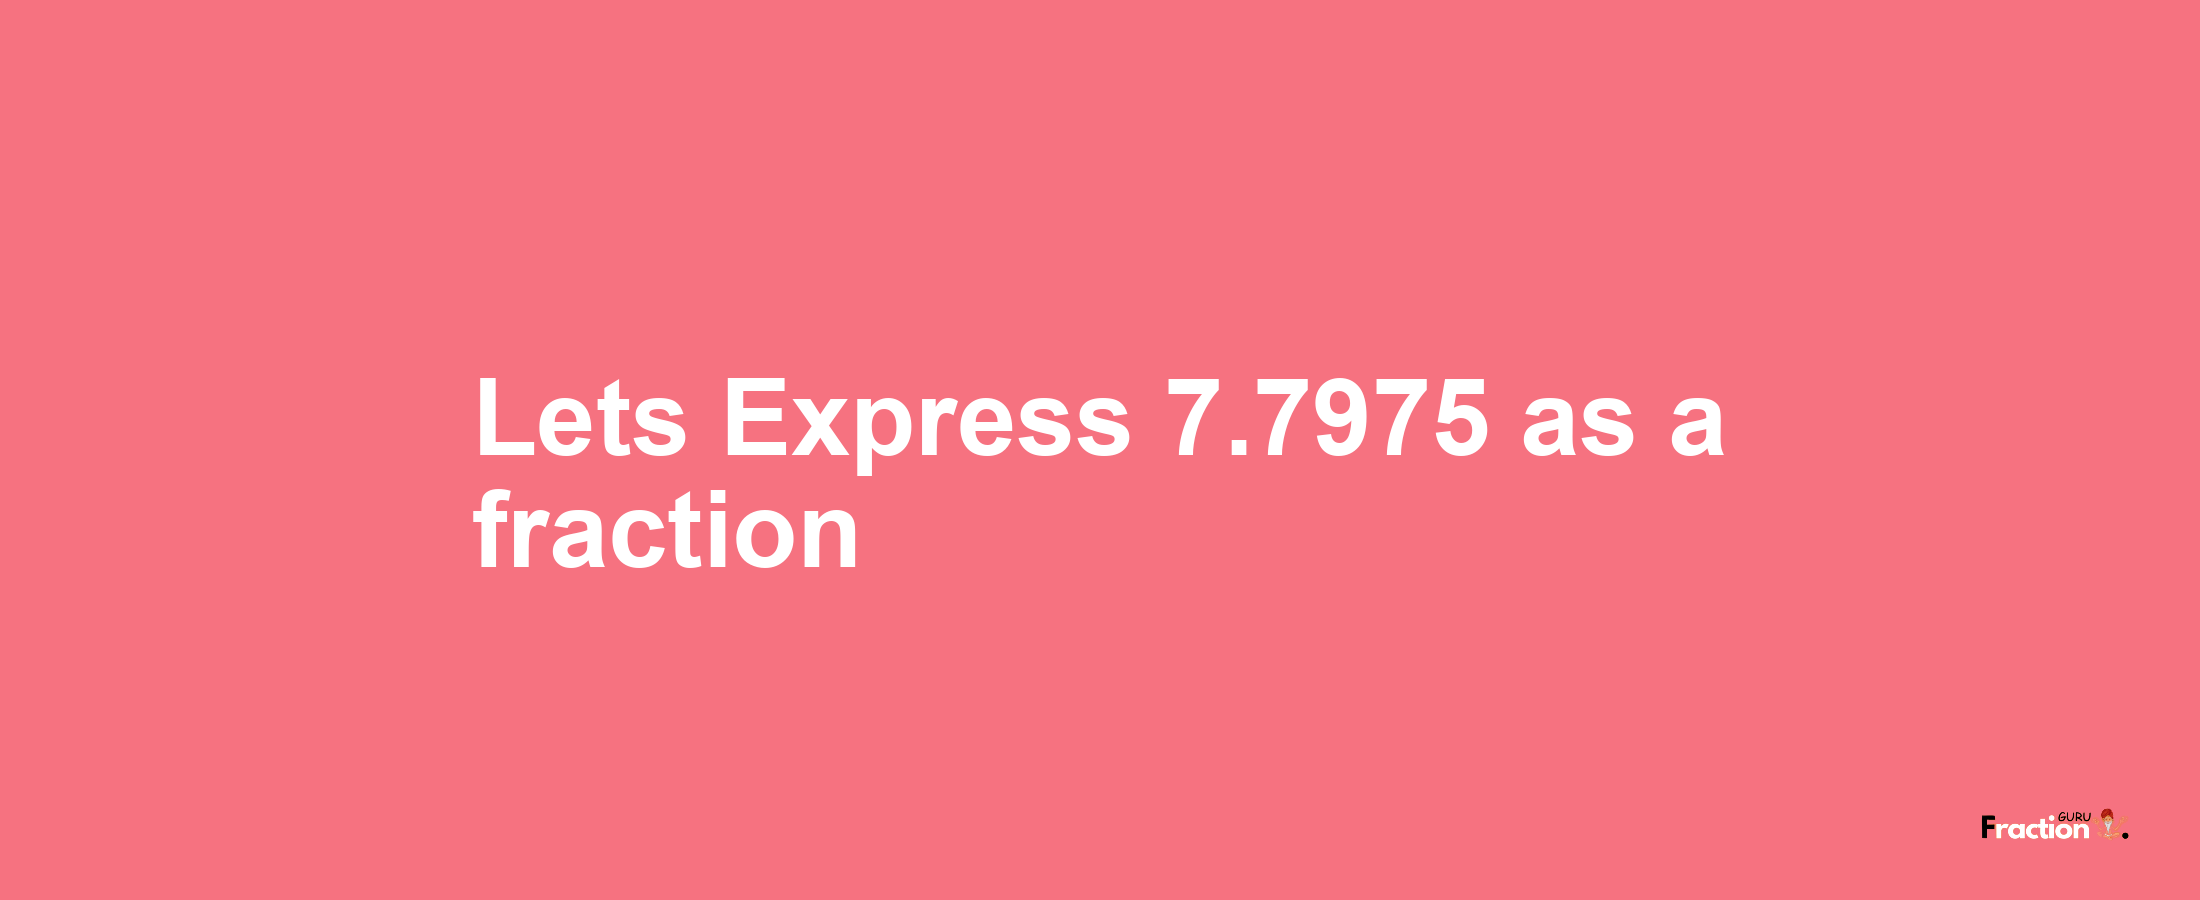 Lets Express 7.7975 as afraction